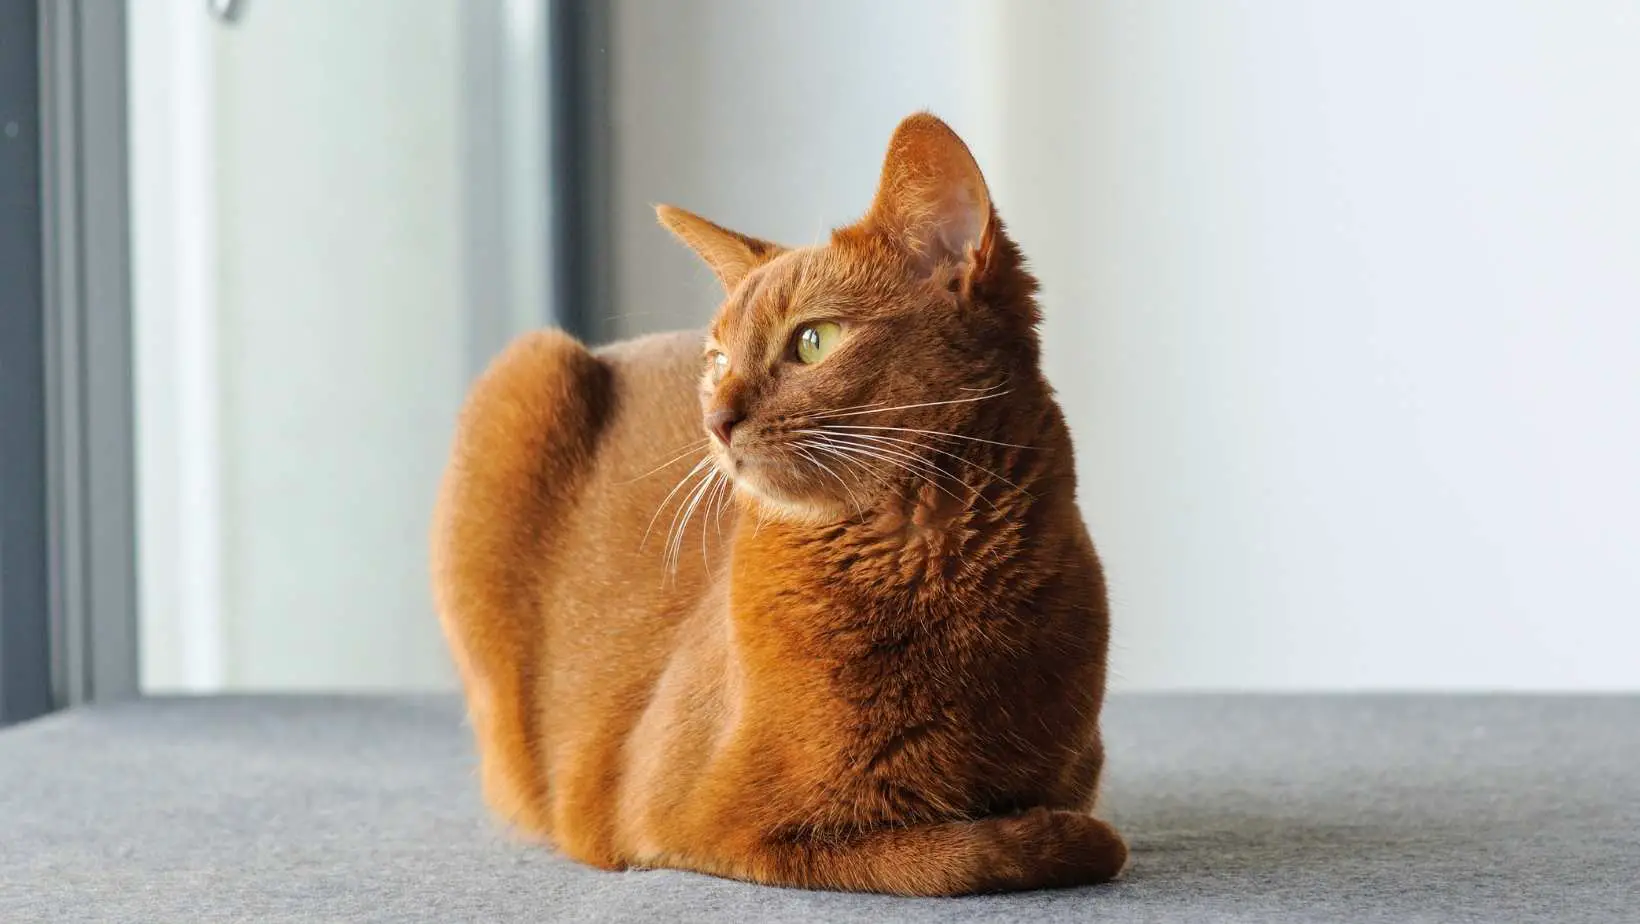 Thinking About Getting an Abyssinian Cat? Here’s What You Need to Know